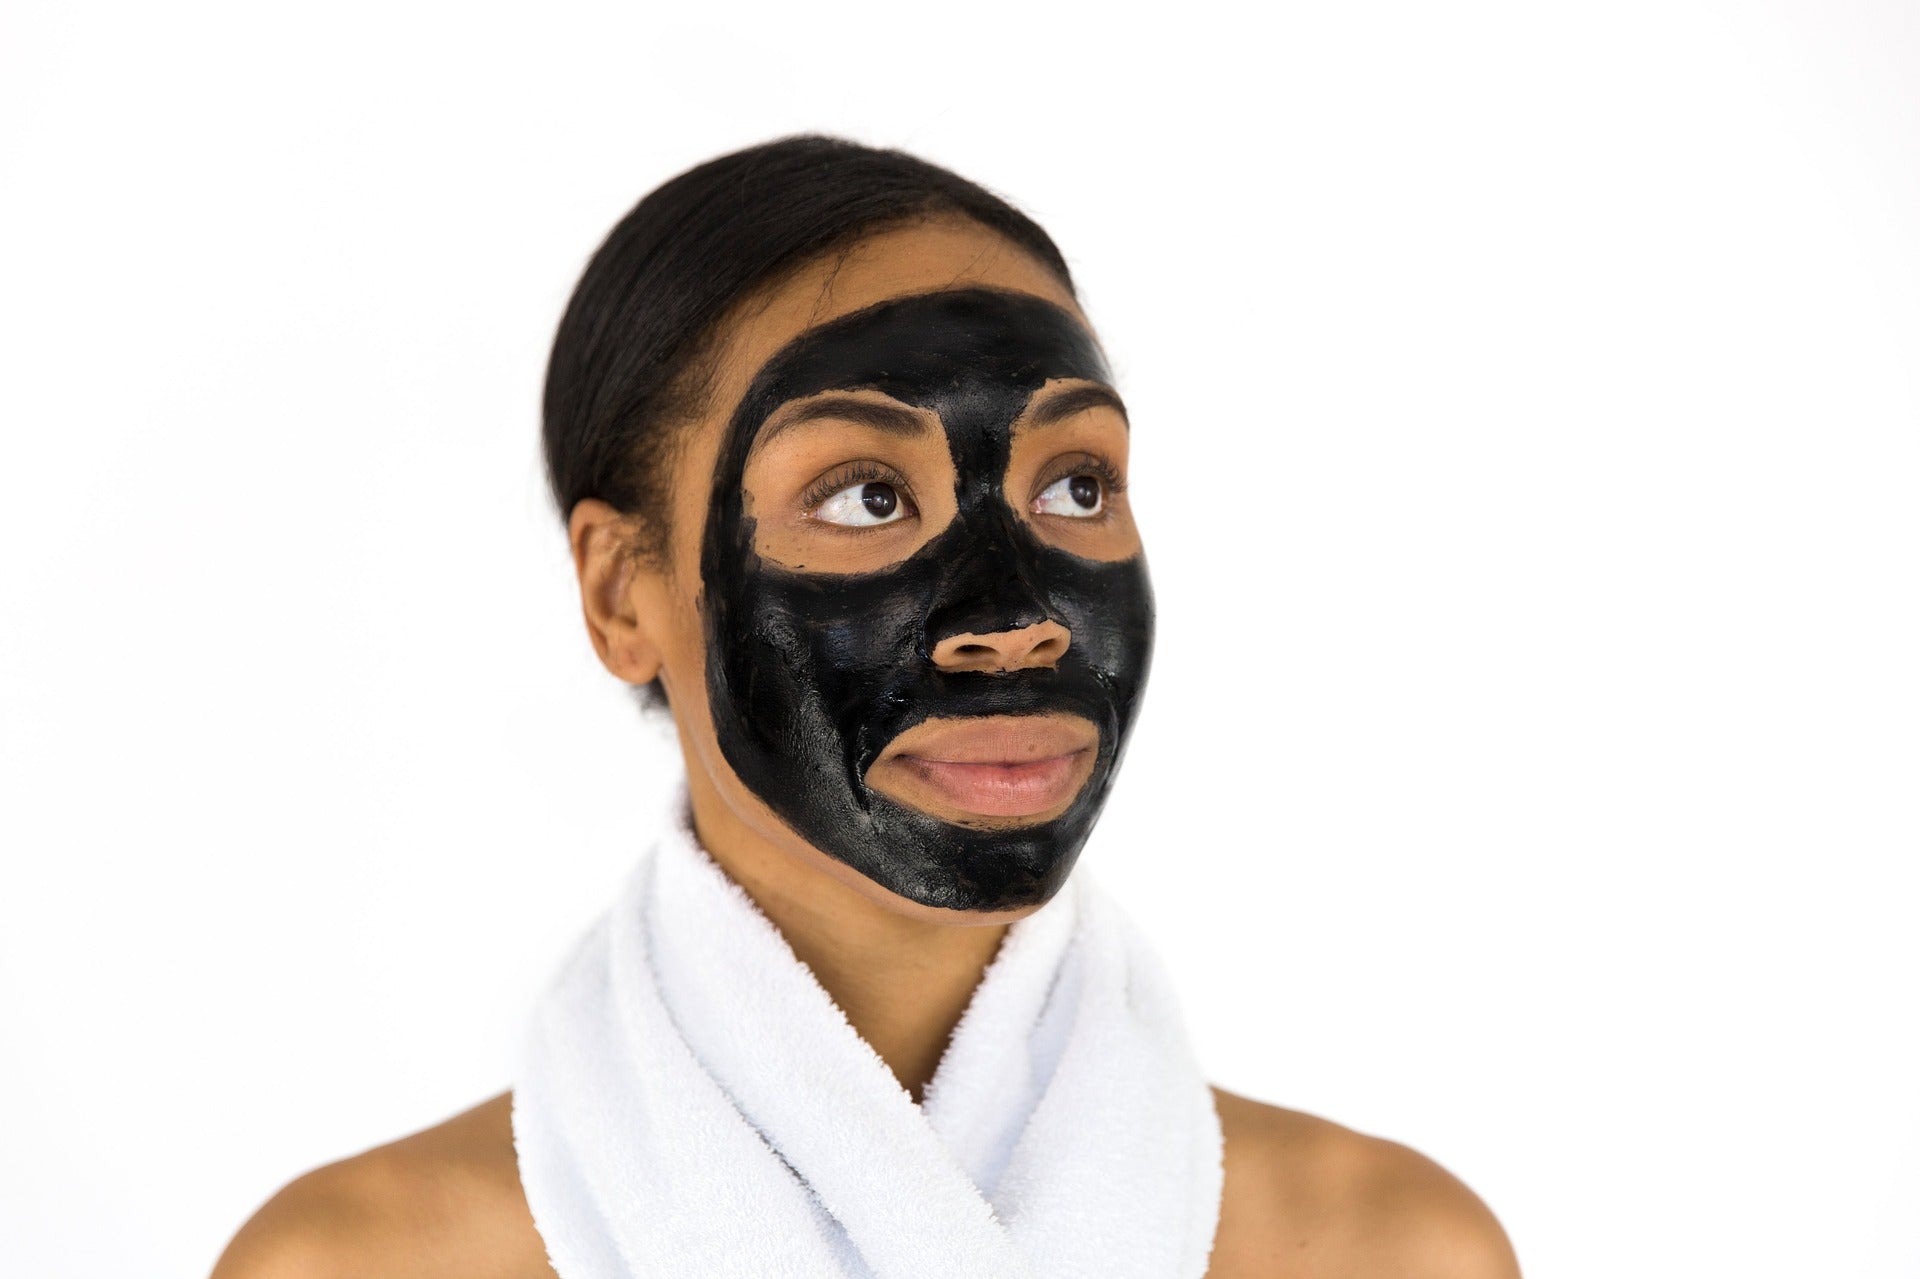 A person with towels around their upper body and neck wears a black cosmetic facemask while holding up the jar of skin treatment cream.